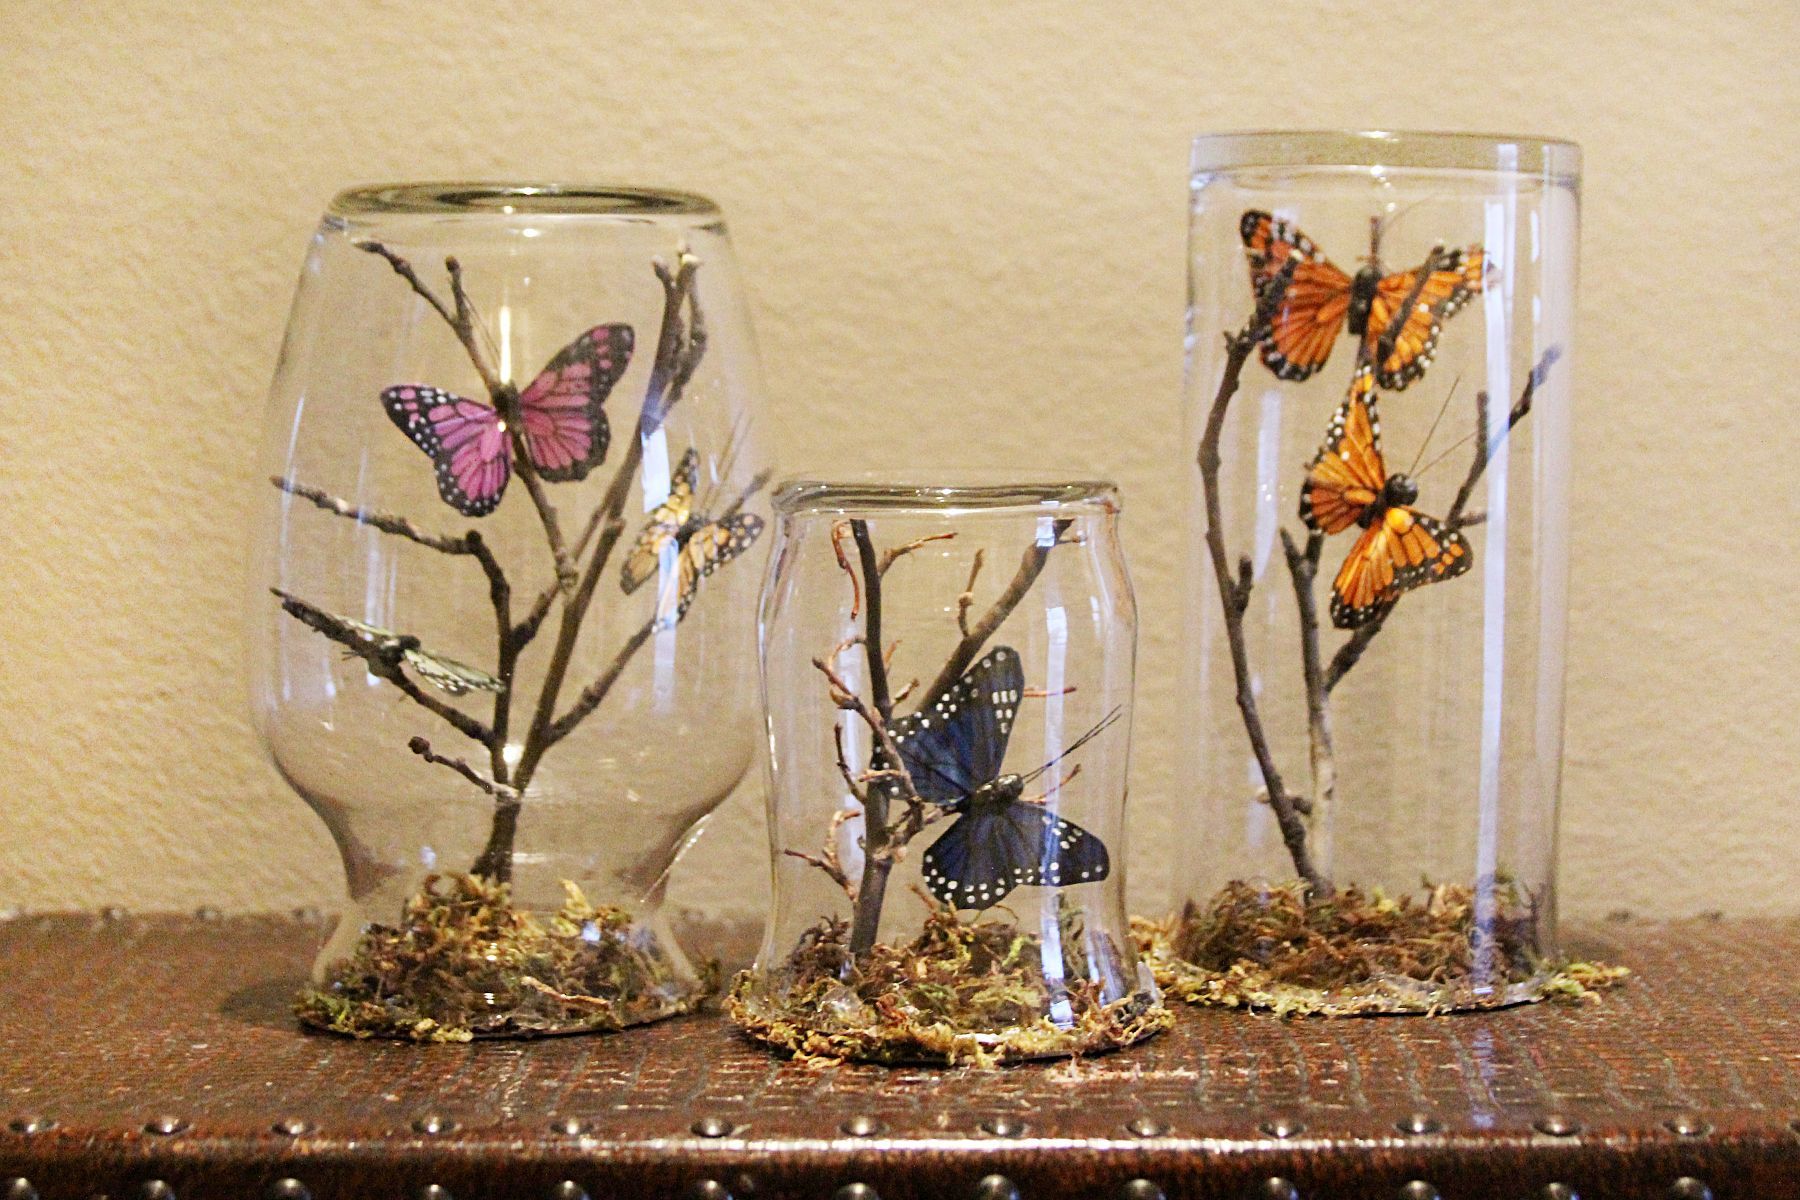 A pretty gift or center piece to make from things you may already have around the house.